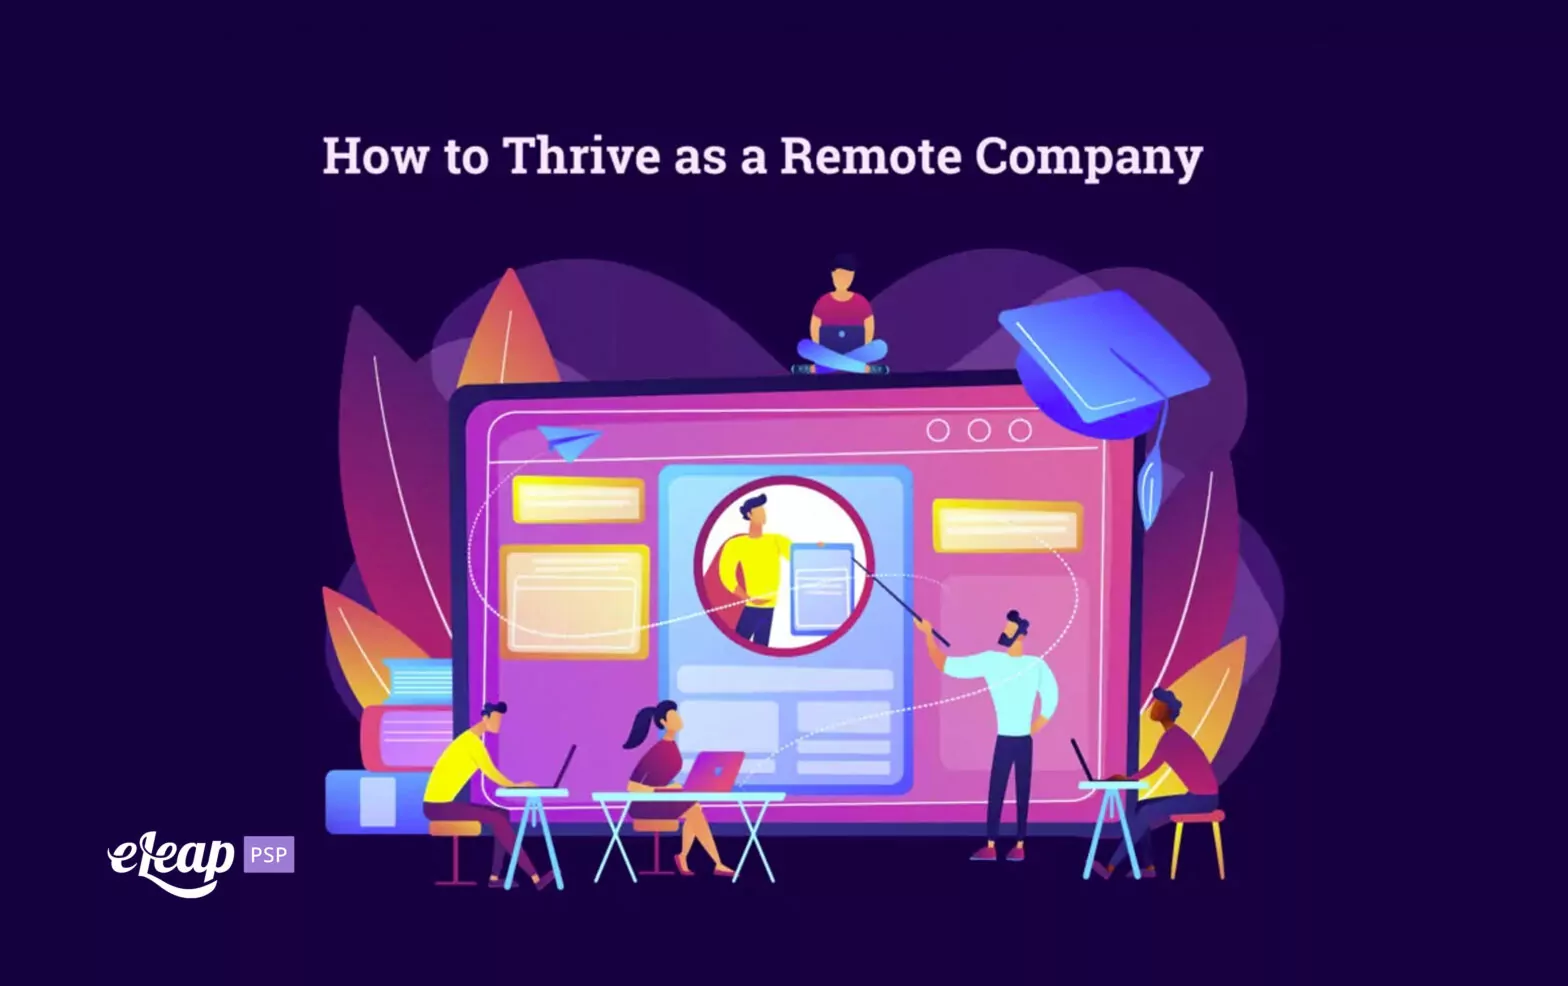 How to Thrive as a Remote Company